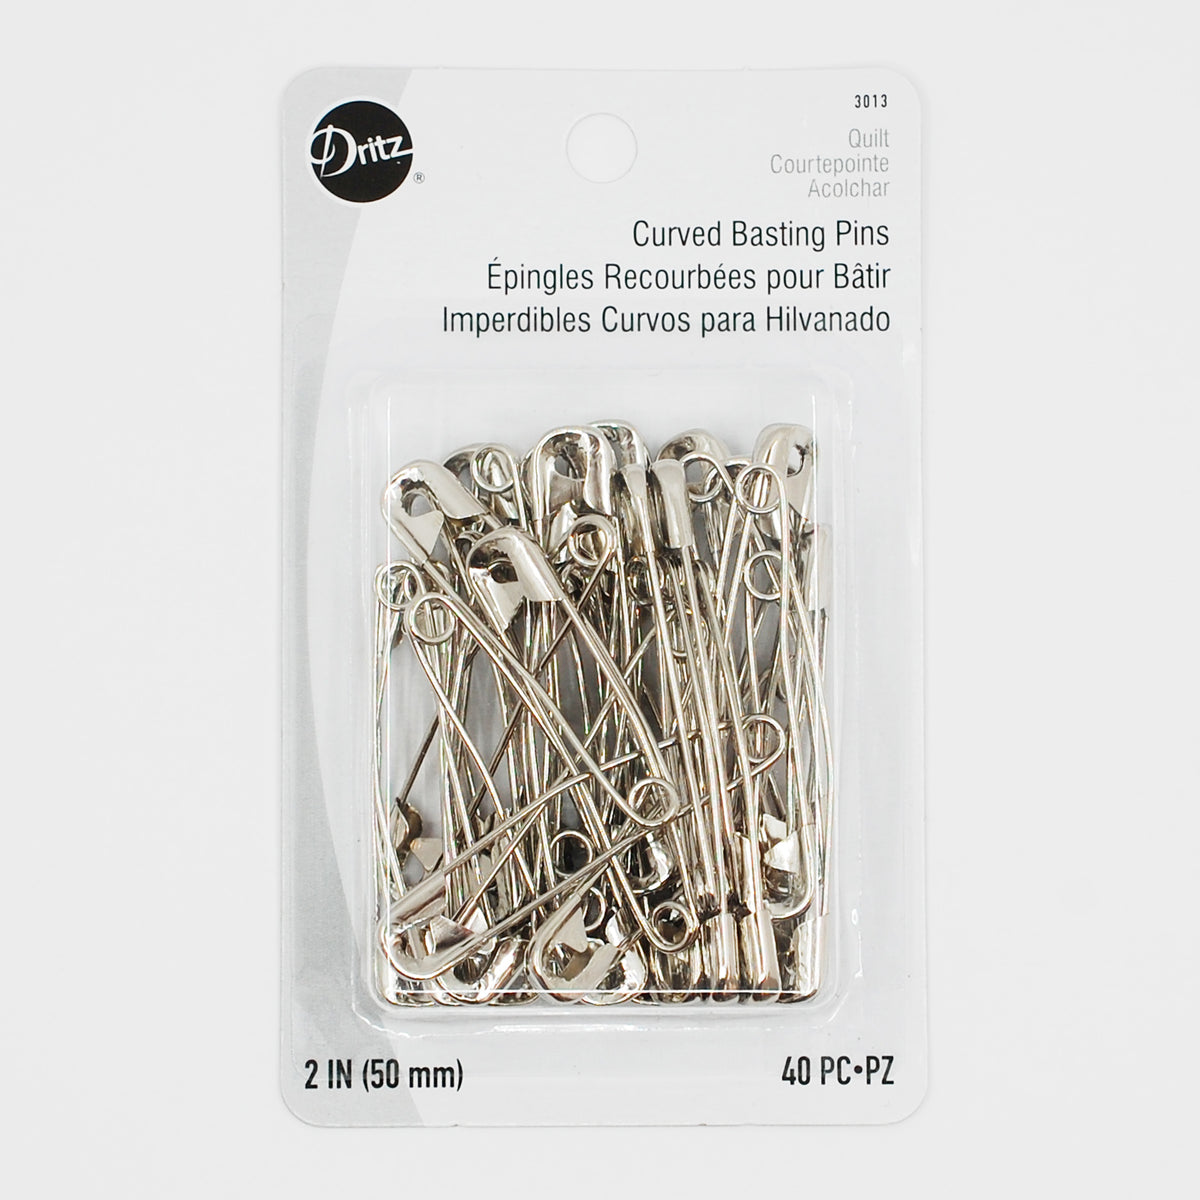 Curved Basting Pins Size 3 3013